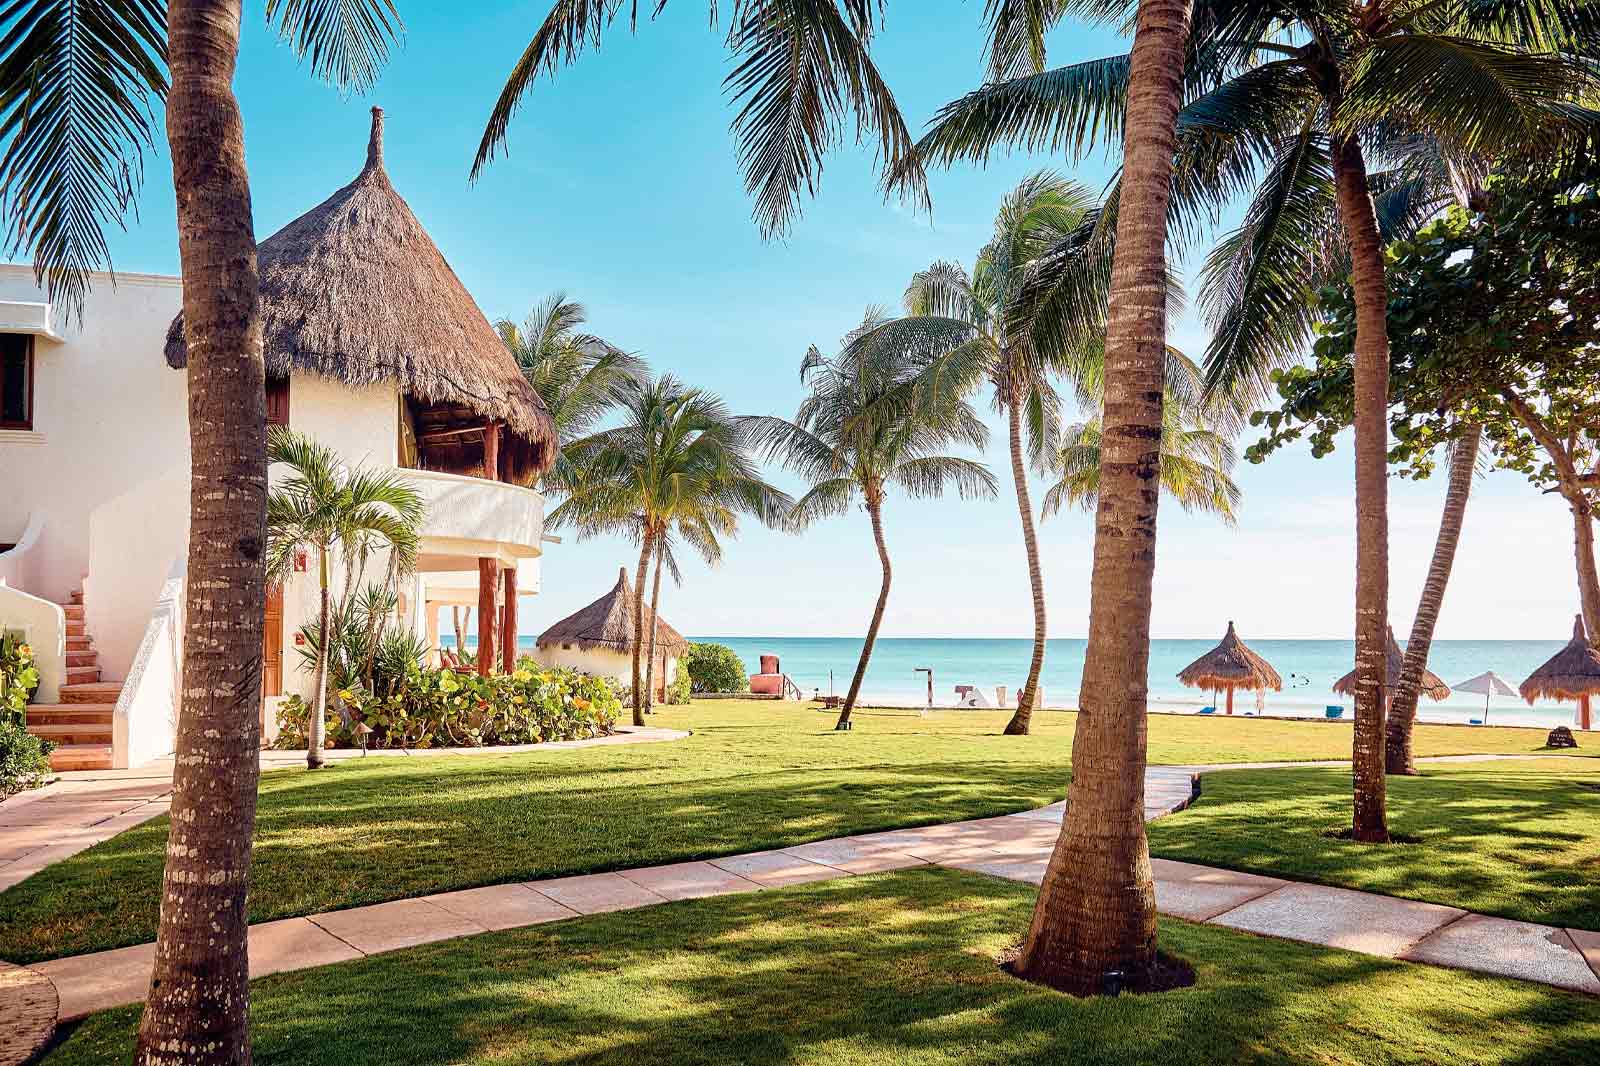 This Legendary Belmond Hotel Is Ready to Rule Riviera Maya Once